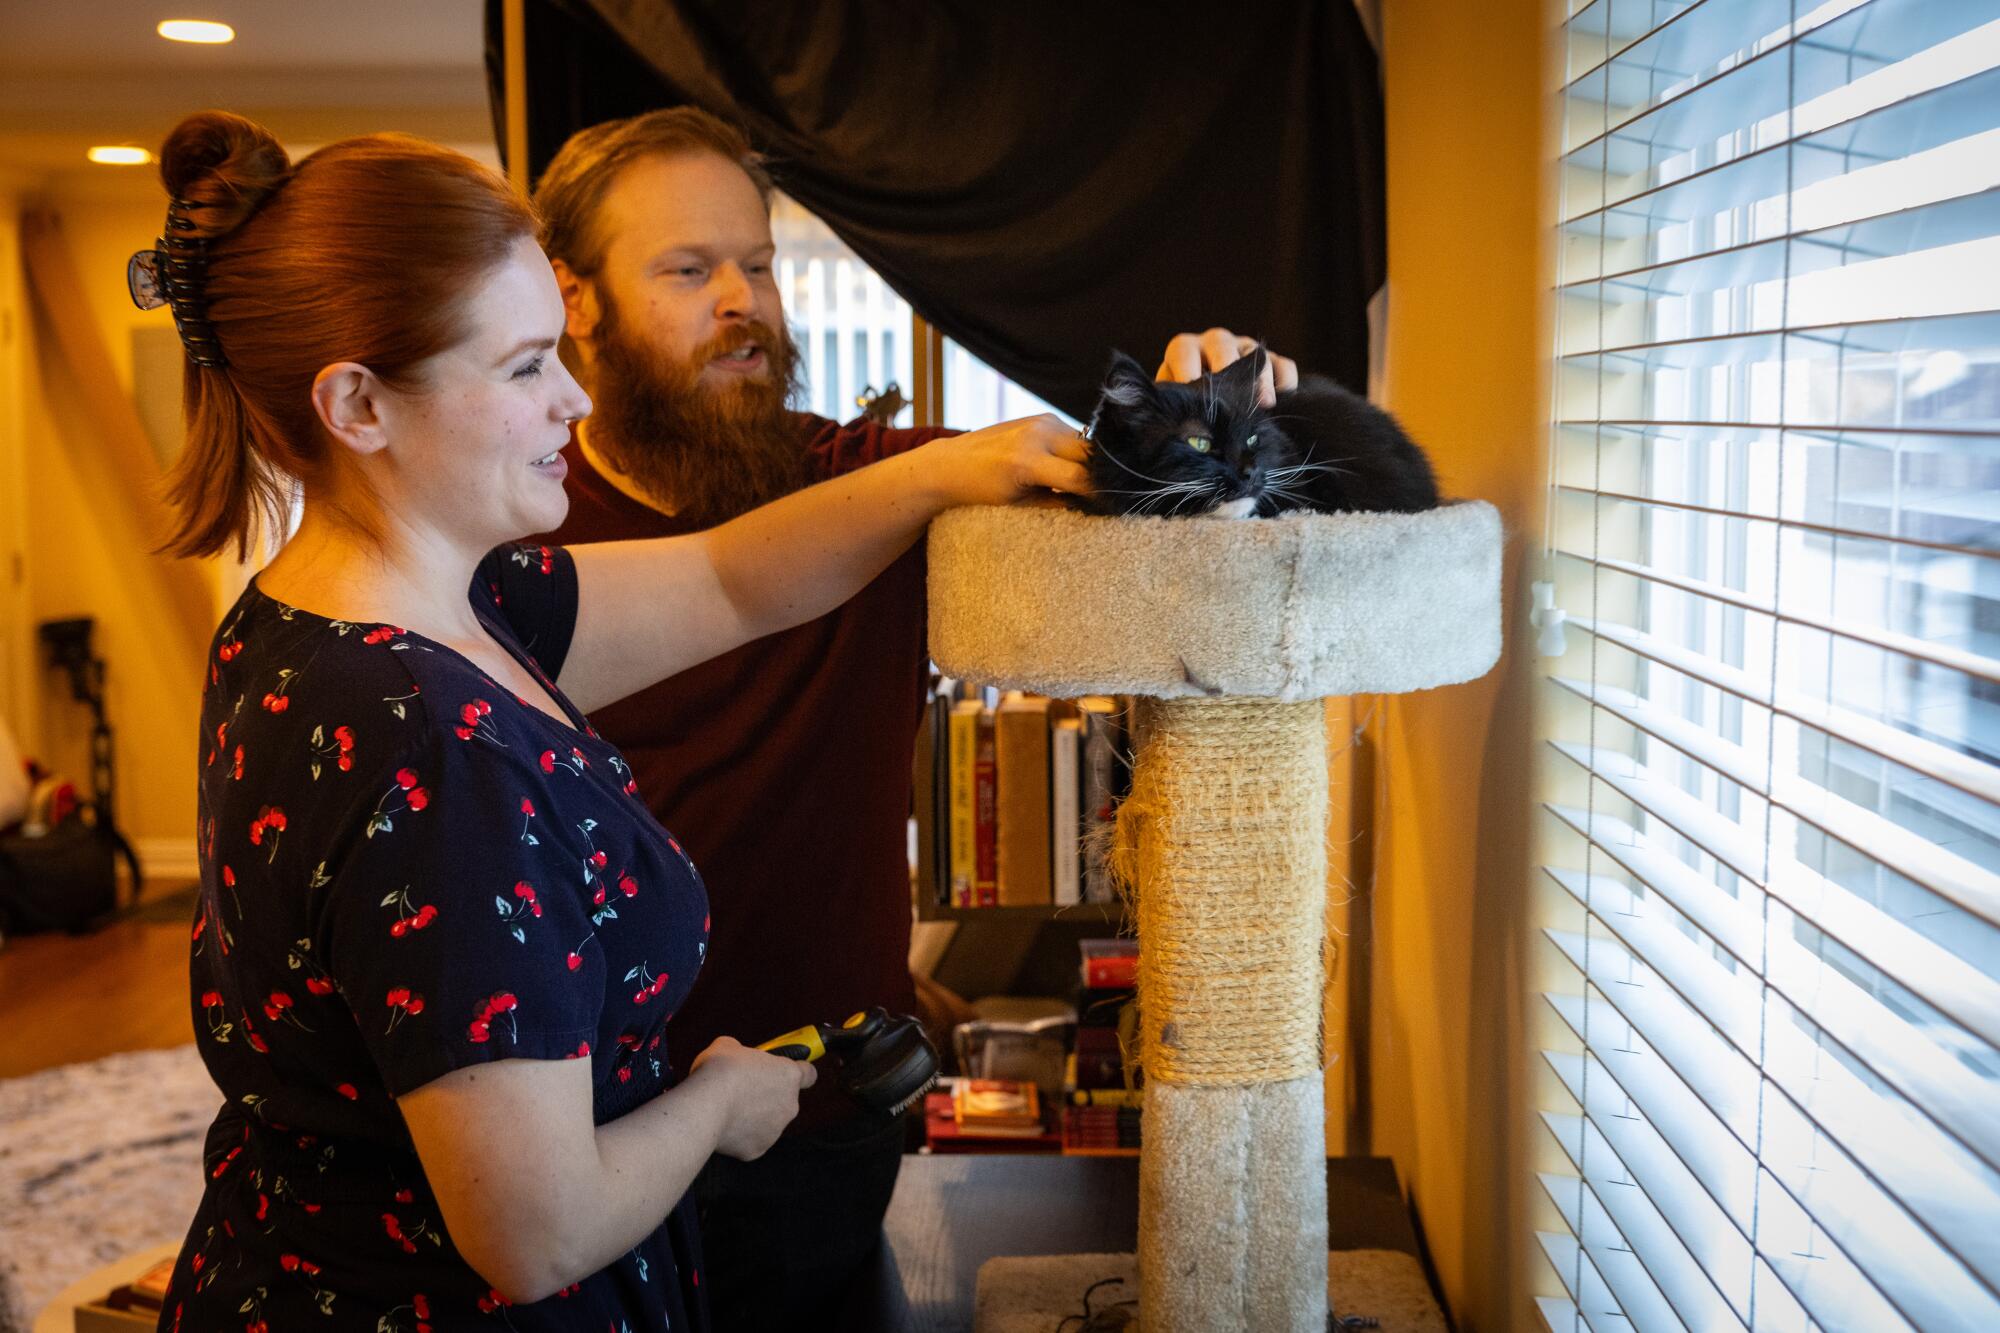 A man and a woman play with their cat.